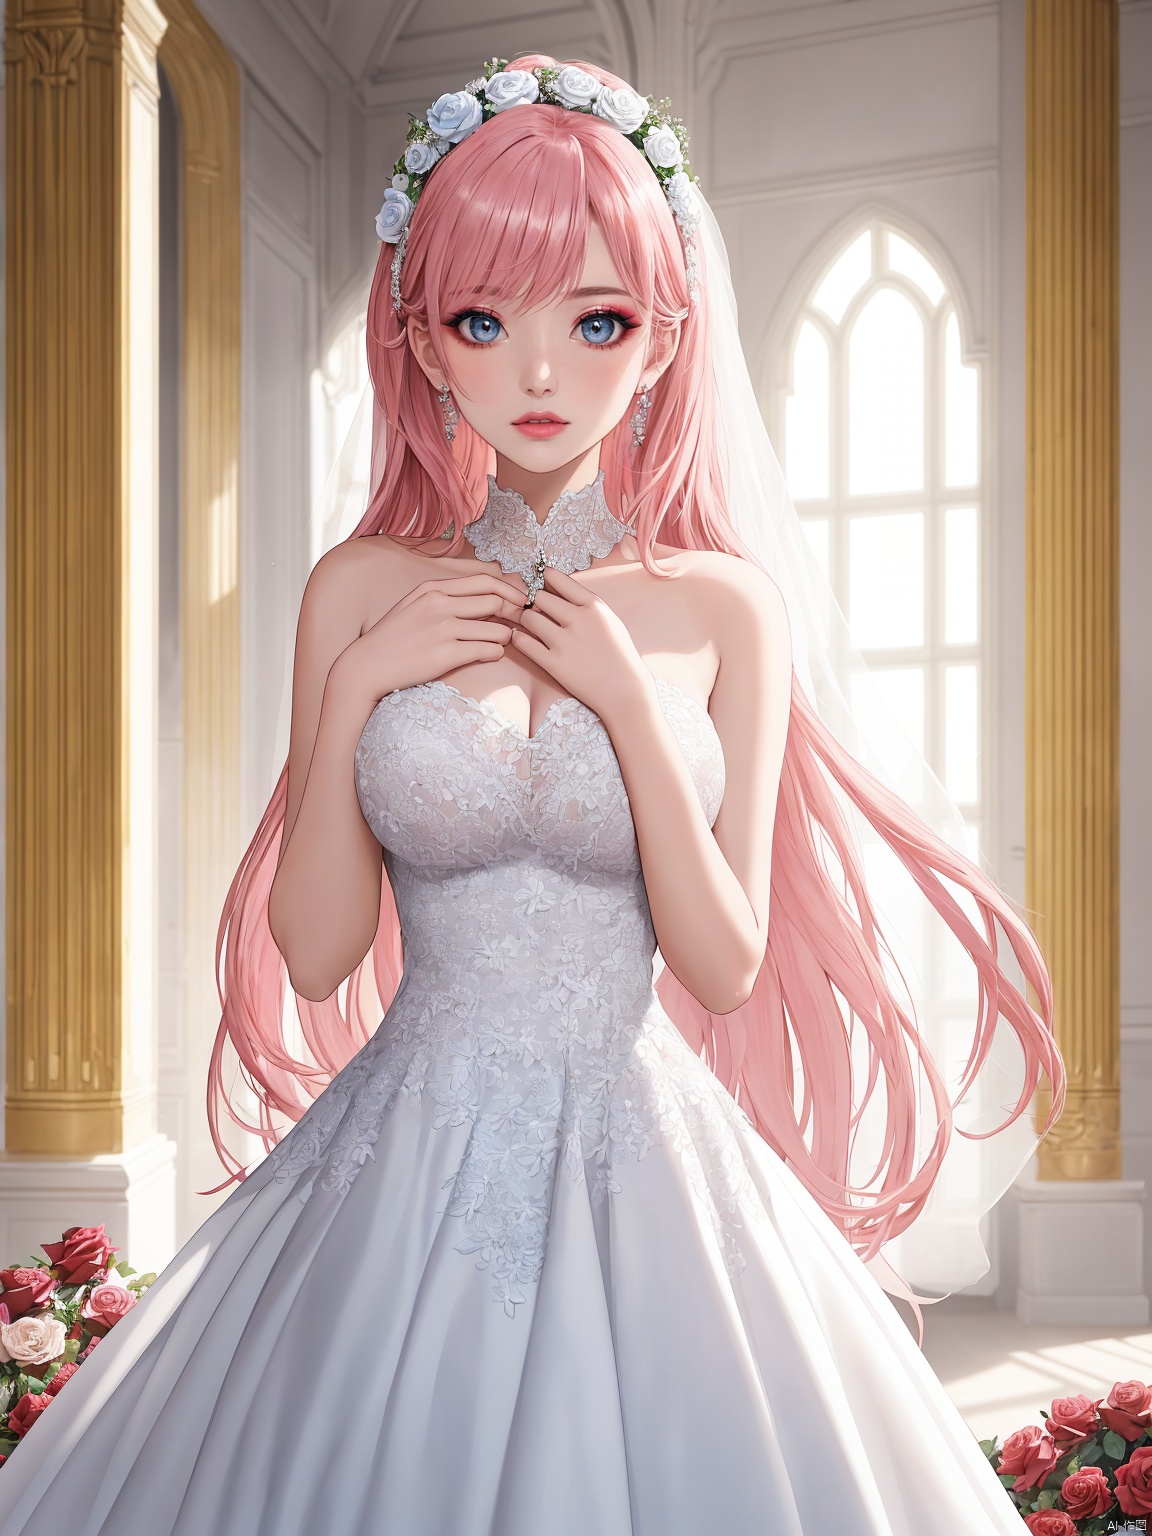  masterpiece,1 girl,22 years old,Look at me,Exquisite makeup,Pink hair.,Long hair,white wedding dress,Wipe the chest,Indoor,Exquisite decoration,Bright light,Stand,In the middle of the picture,Whole body,Plenty of roses,textured skin,super detail,best quality,Future City,FilmGirl,blue and white porcelain,